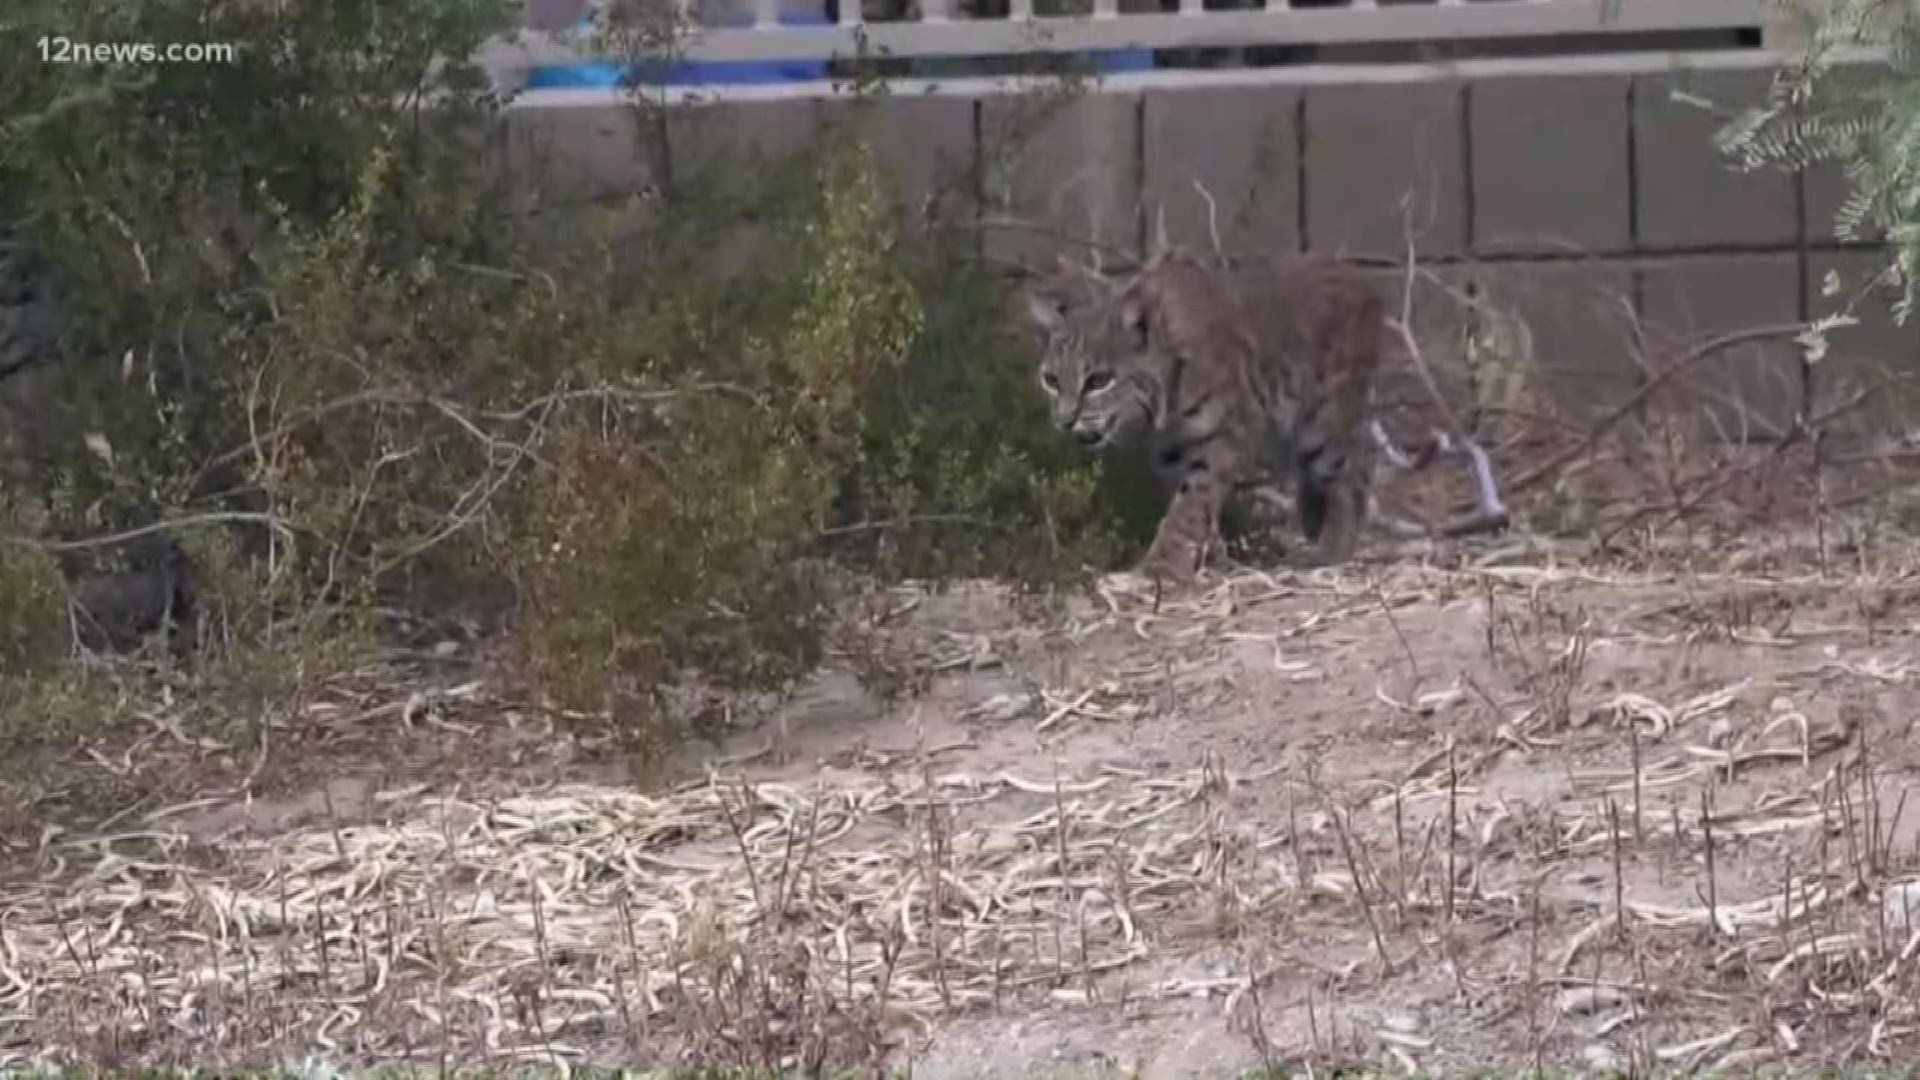 Bobcats are making themselves right at home in an Ahwatukee neighborhood. Some residents wonder if the new freeway going in is to blame for the increased sightings.